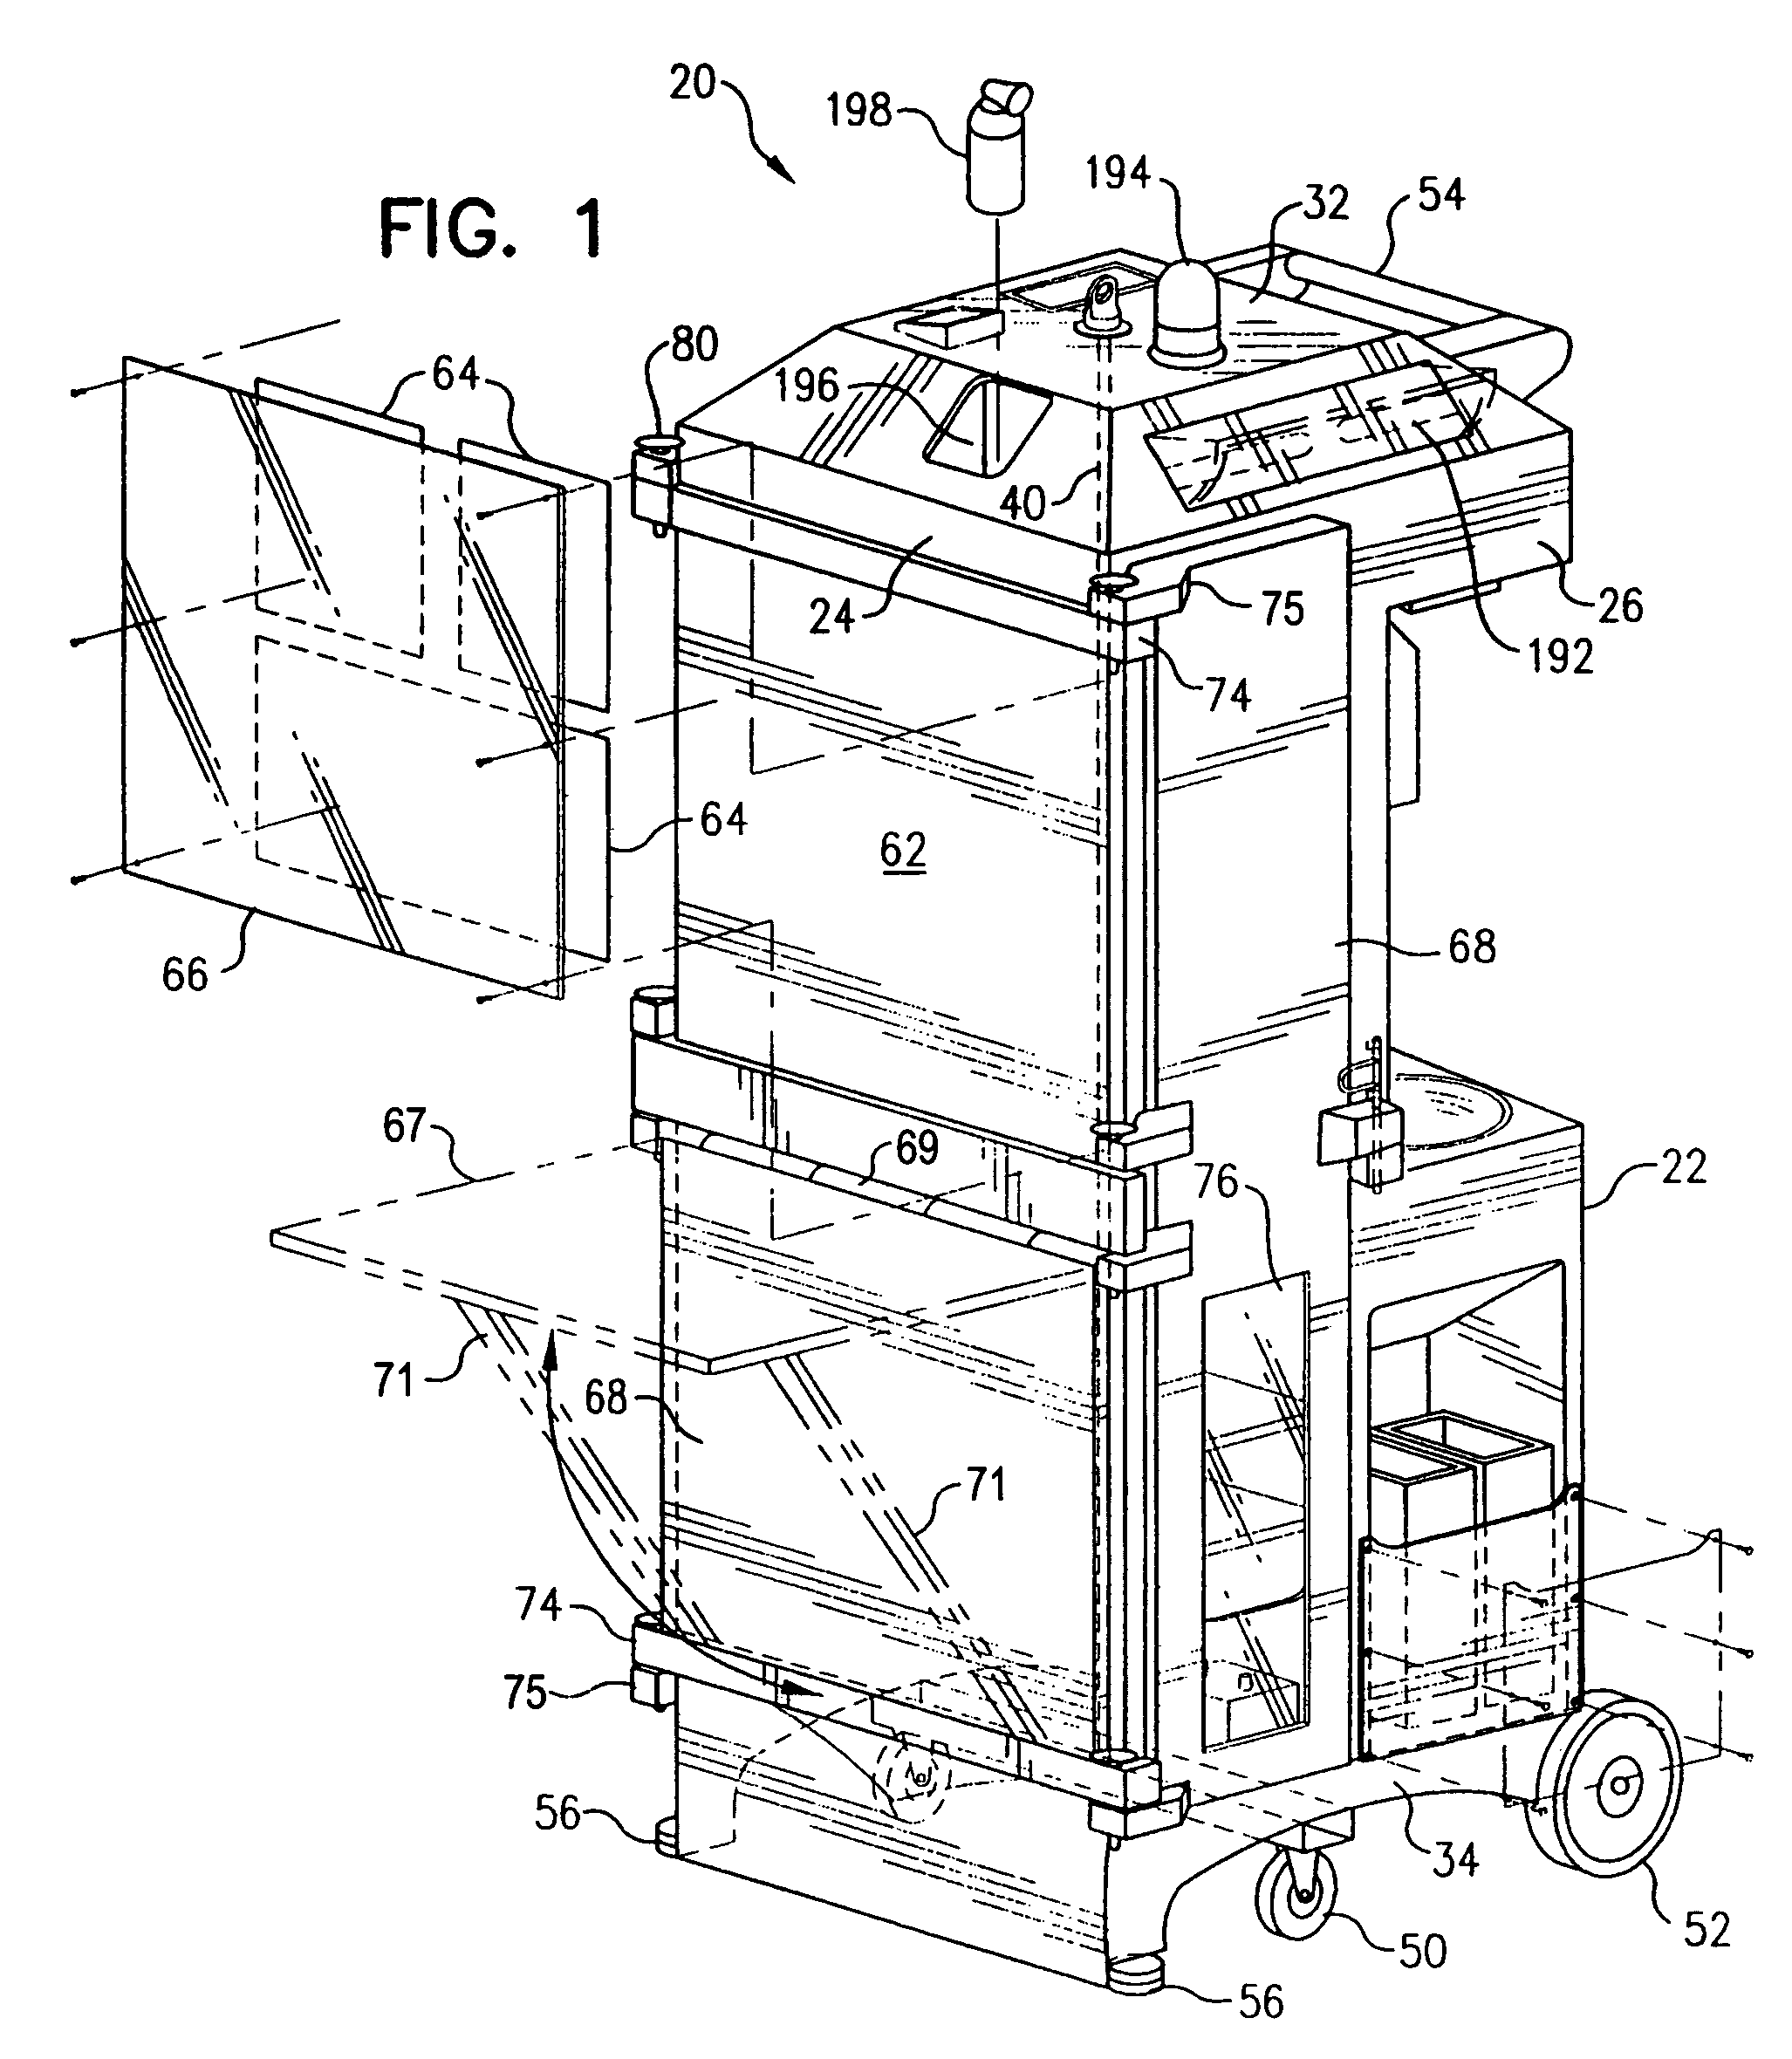 Mobile safety compliance apparatus